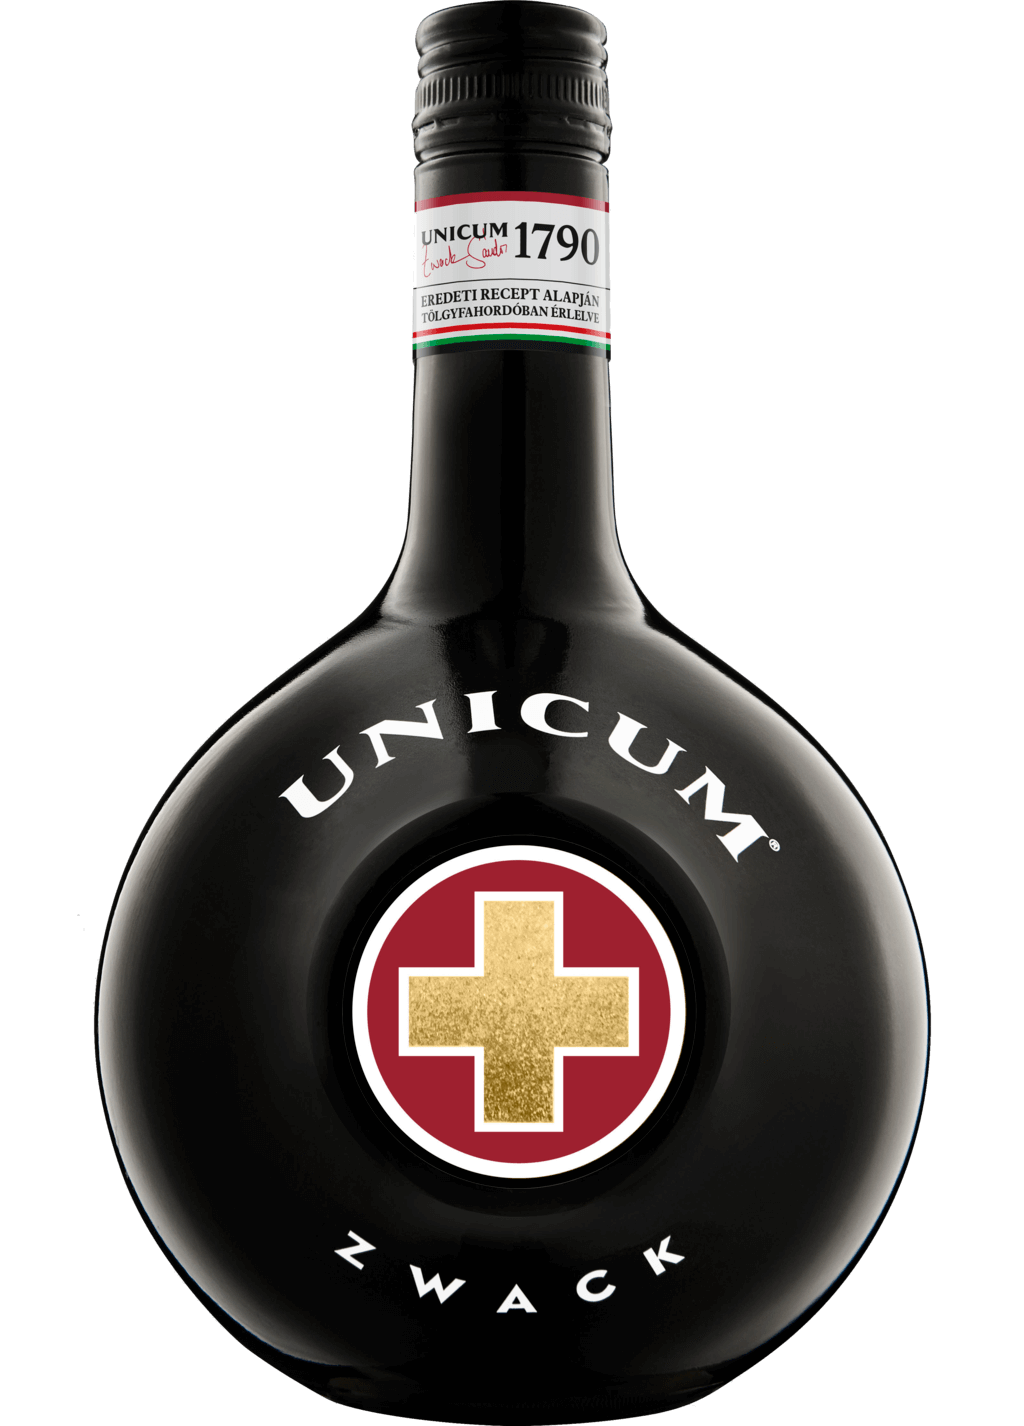 Unicum is a great souvenir from Barcelona